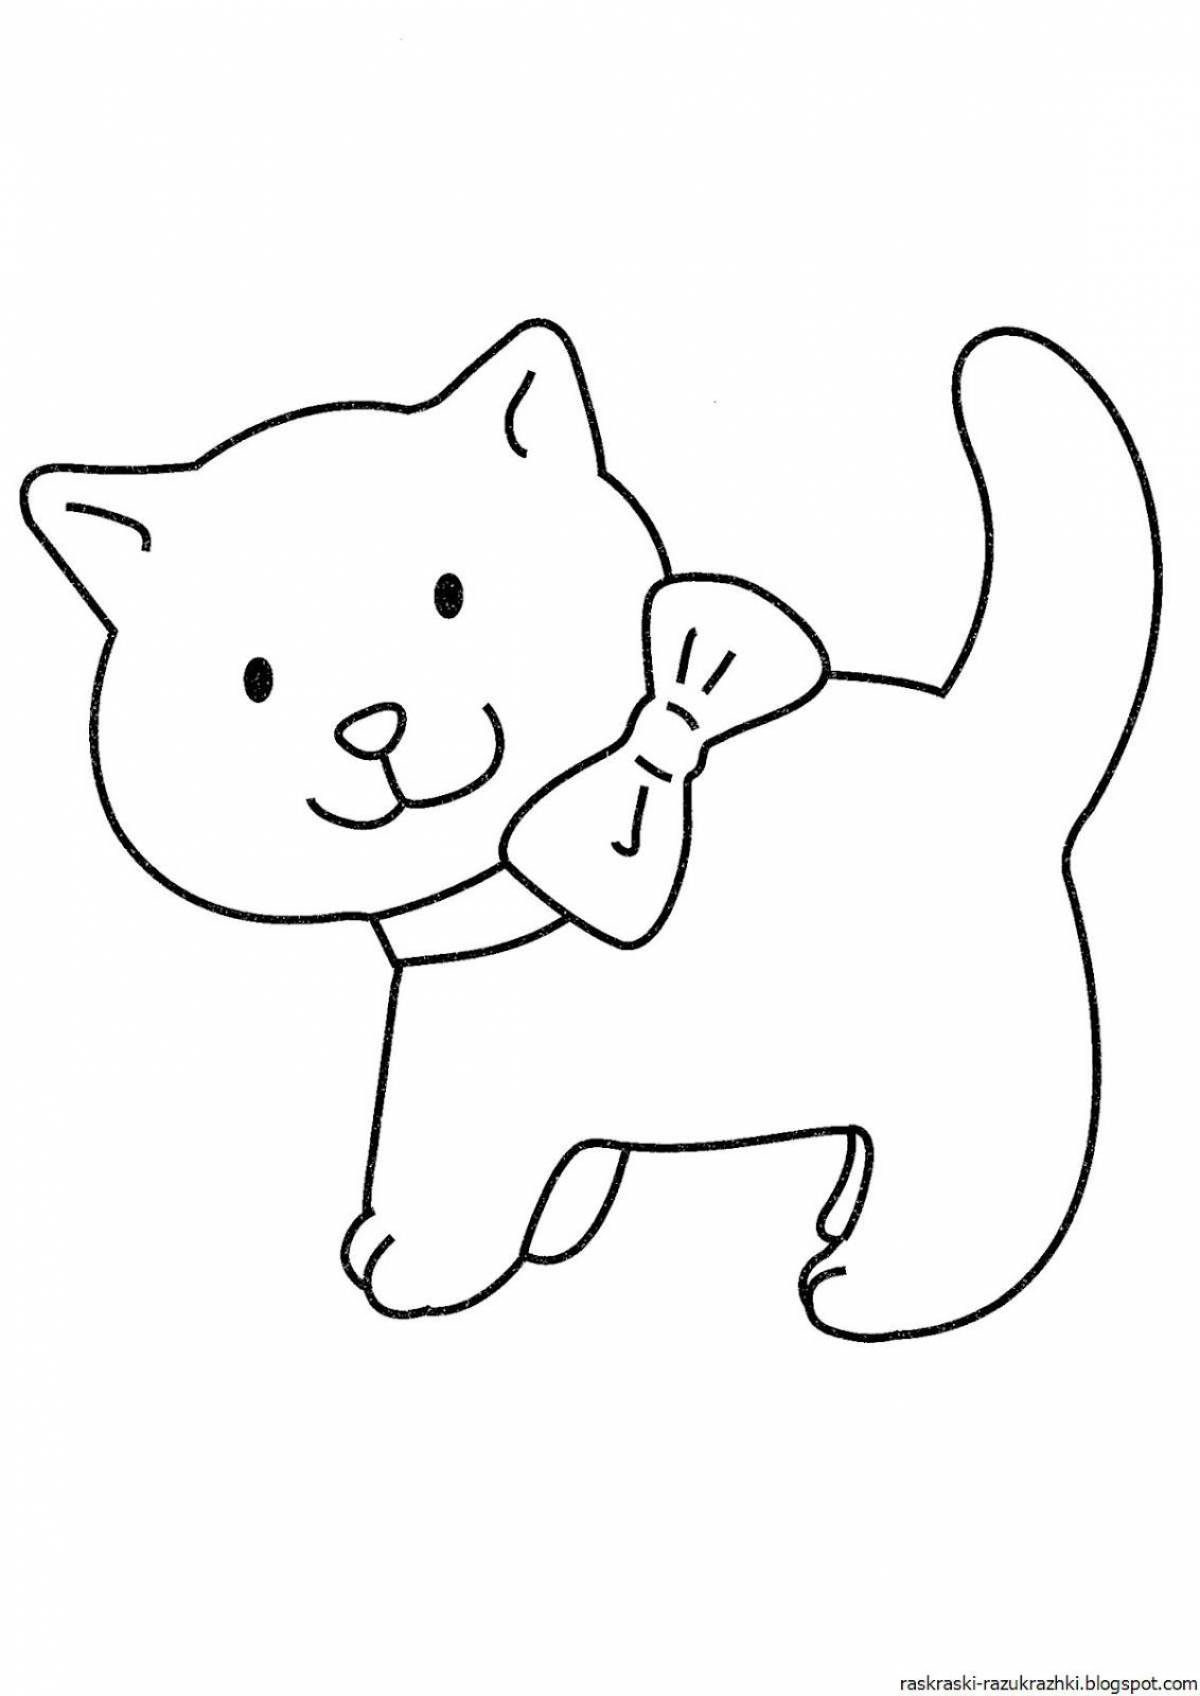 Witty cat coloring book for kids 3-4 years old